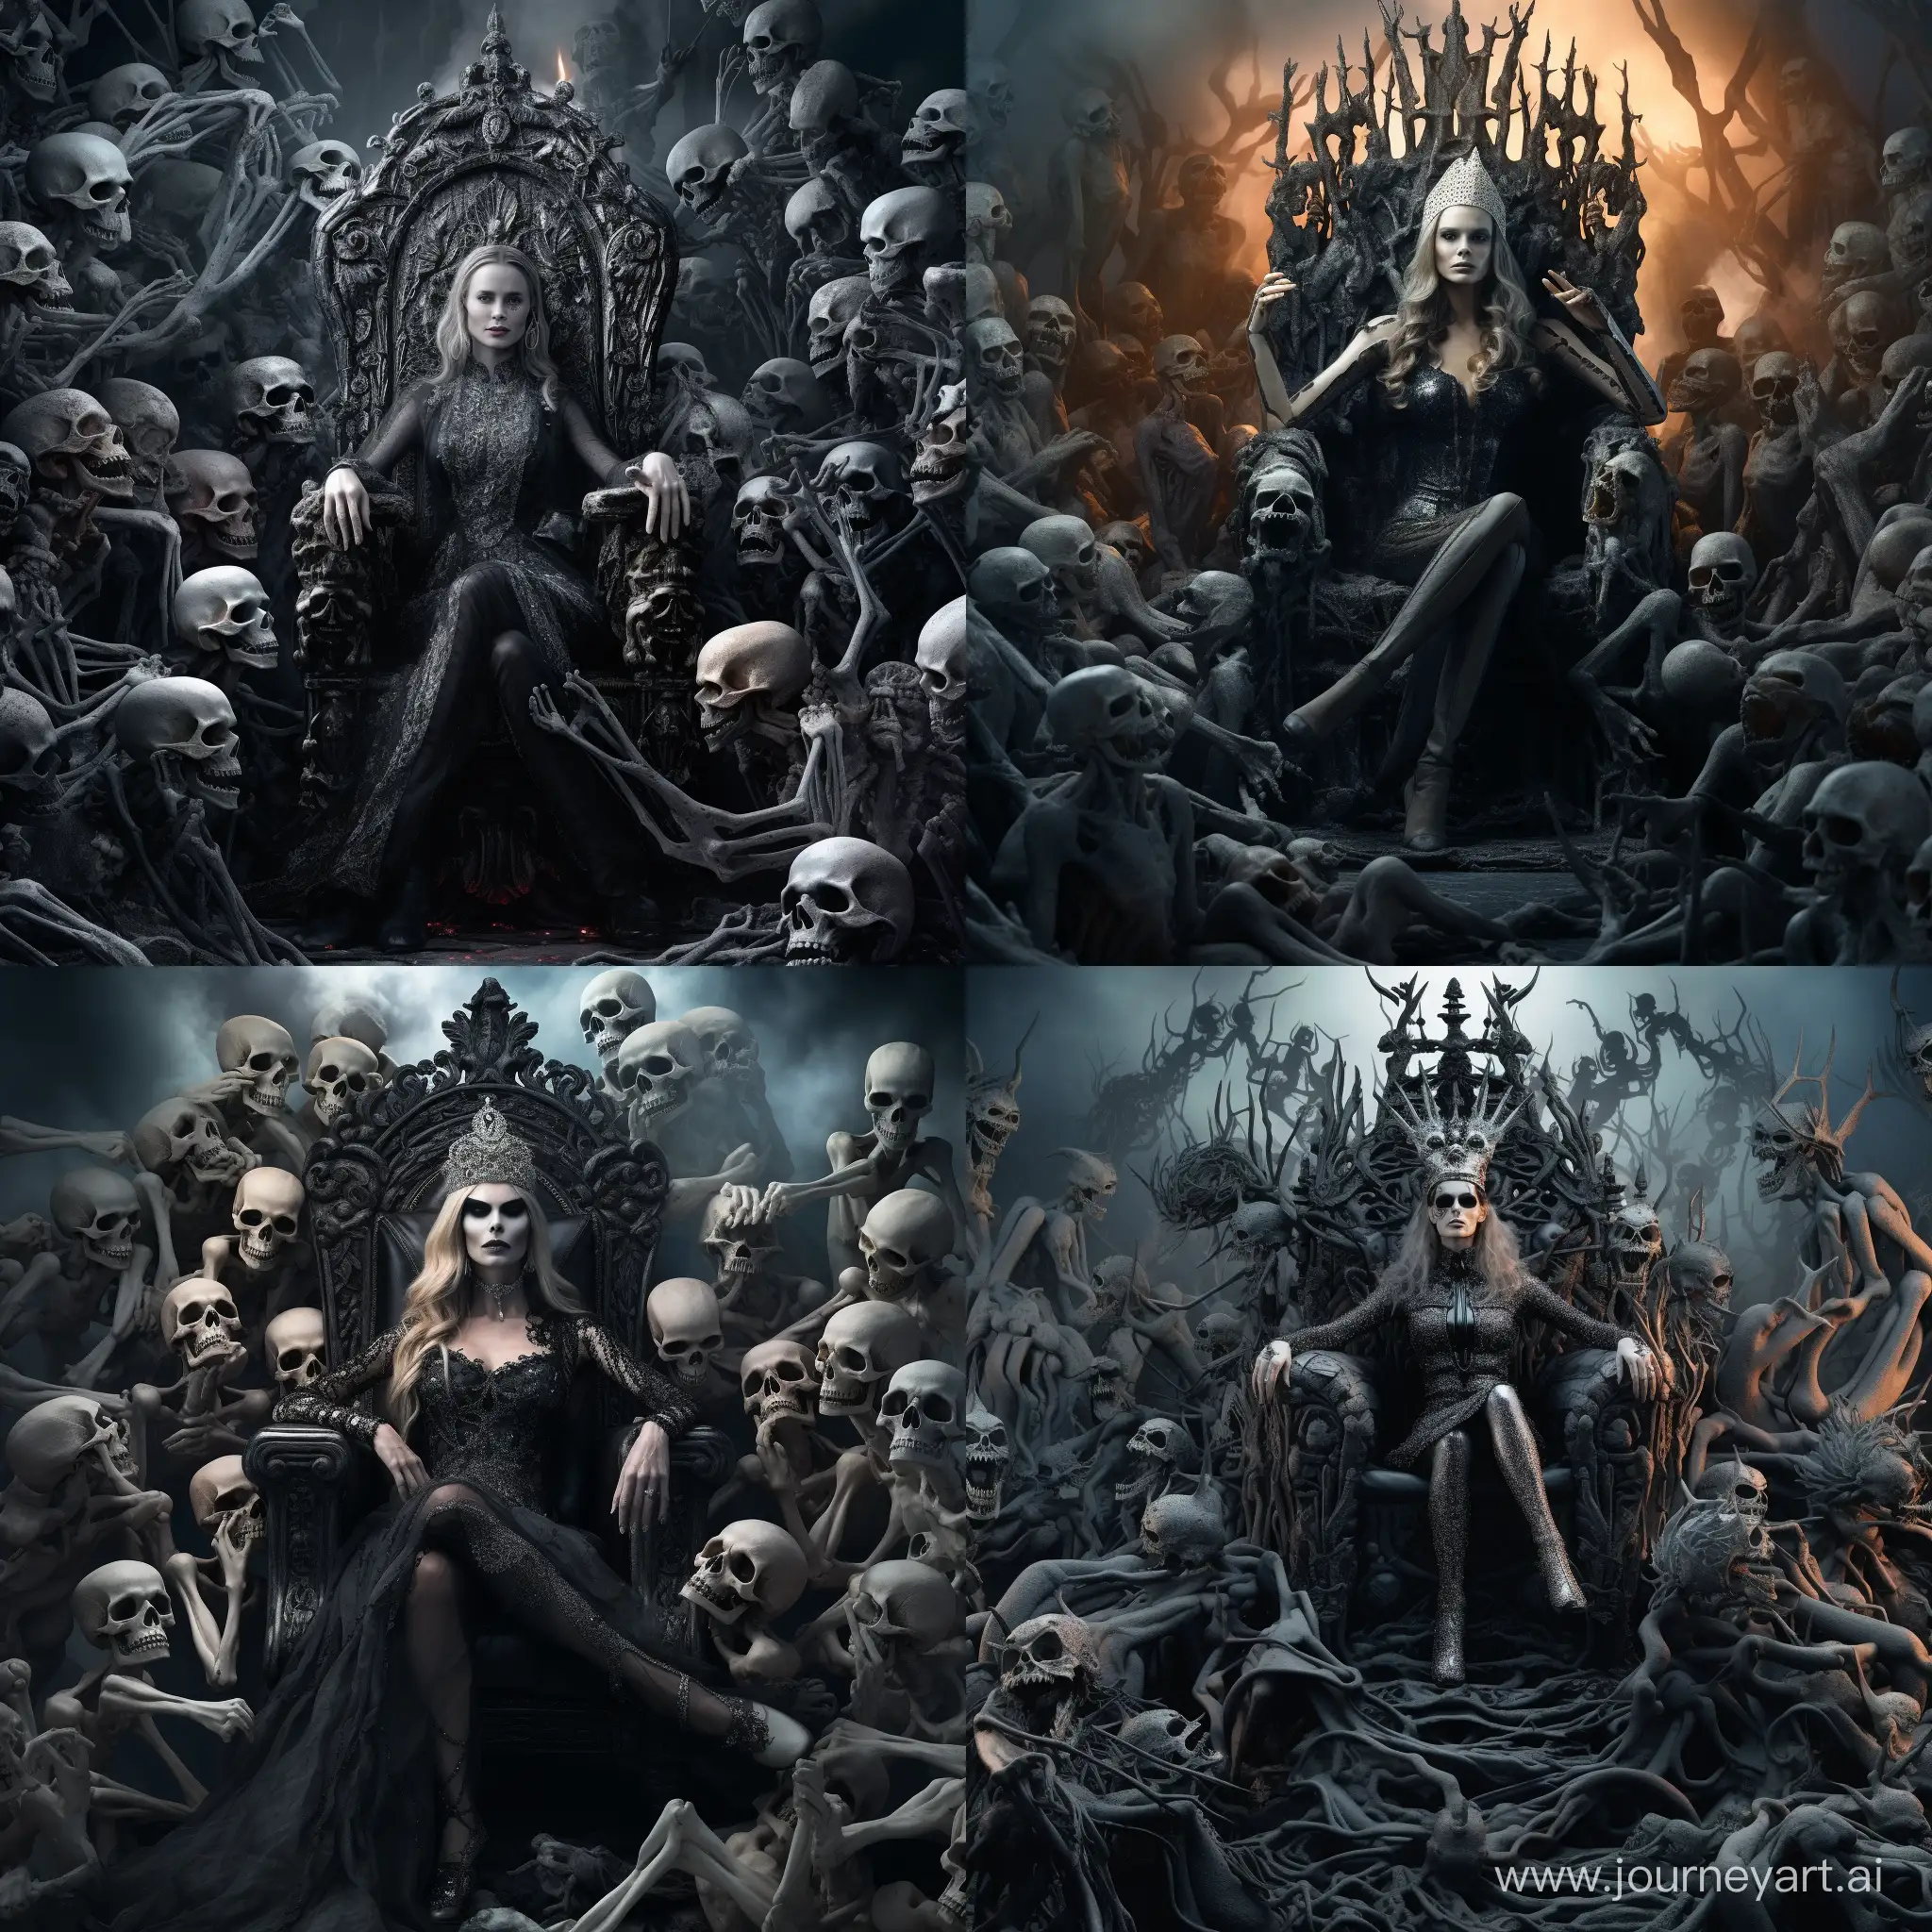 Malevolent-Witch-Queen-on-Throne-of-Skeletons-in-Stunning-Realism